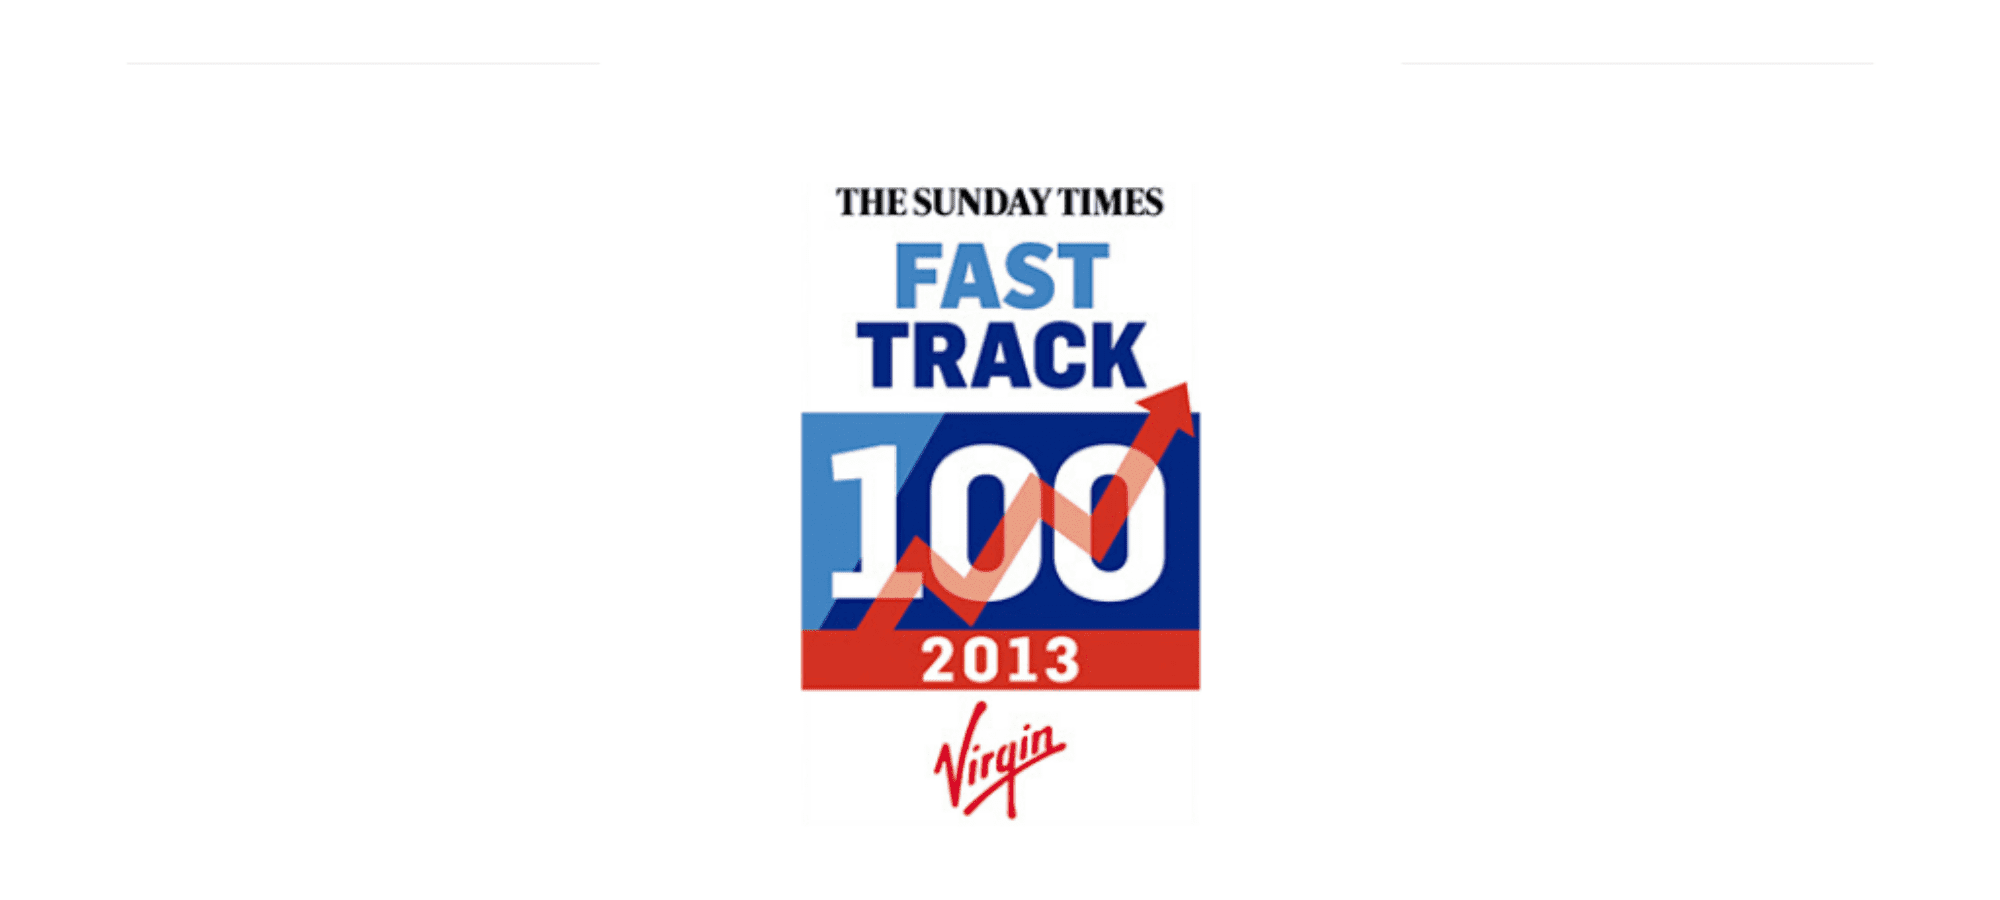 The Sunday Times Fast Track 100 - 2013